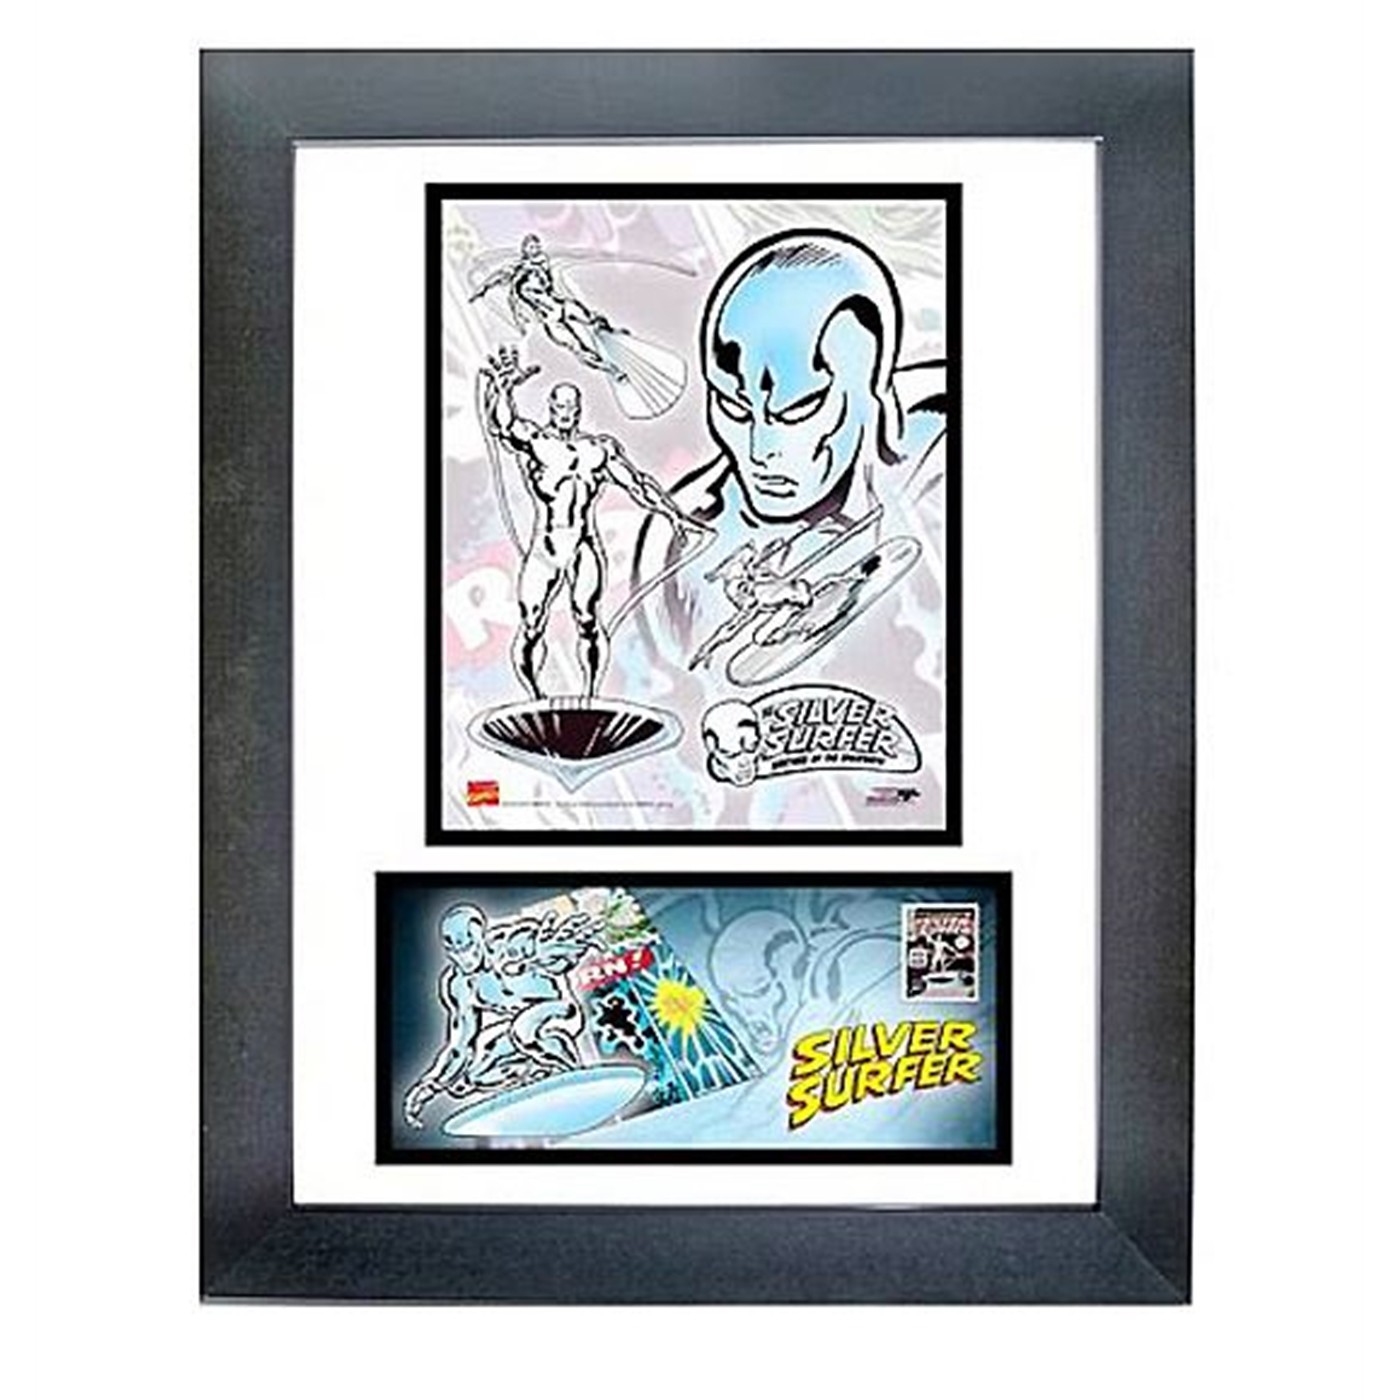 Silver Surfer 14x18 Framed Double Matted Photo